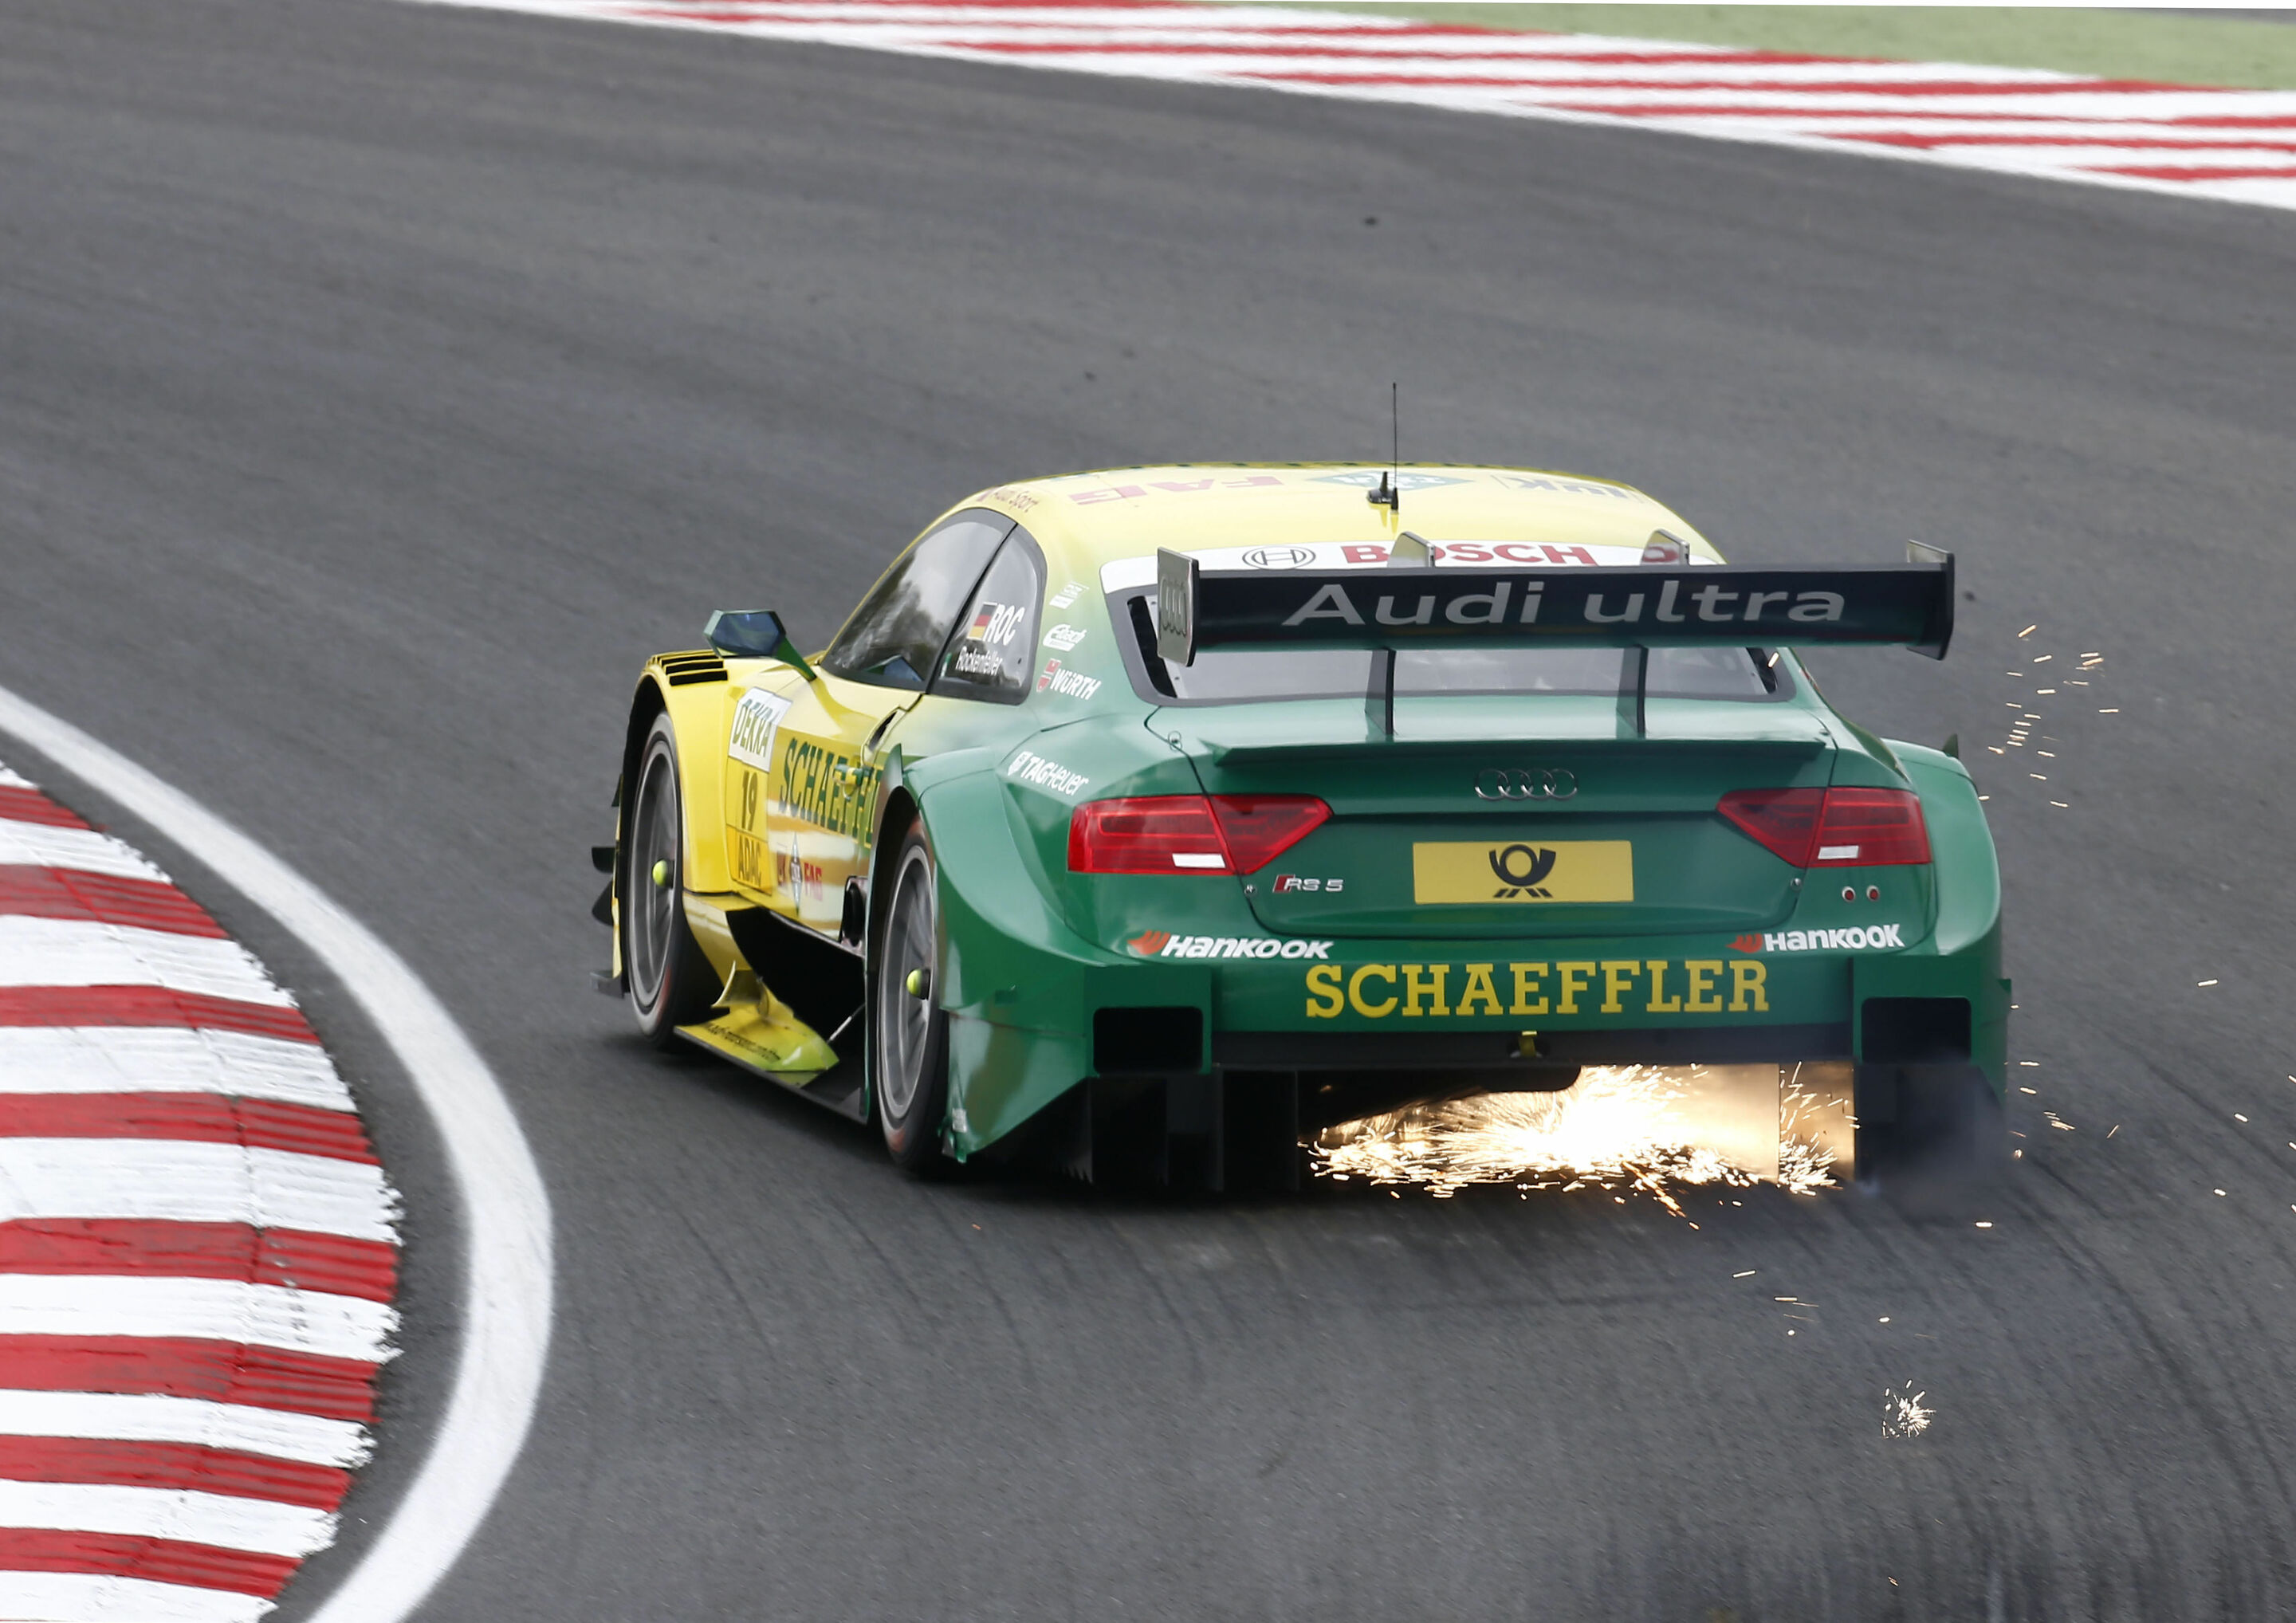 Audi RS 5 DTM on front row again